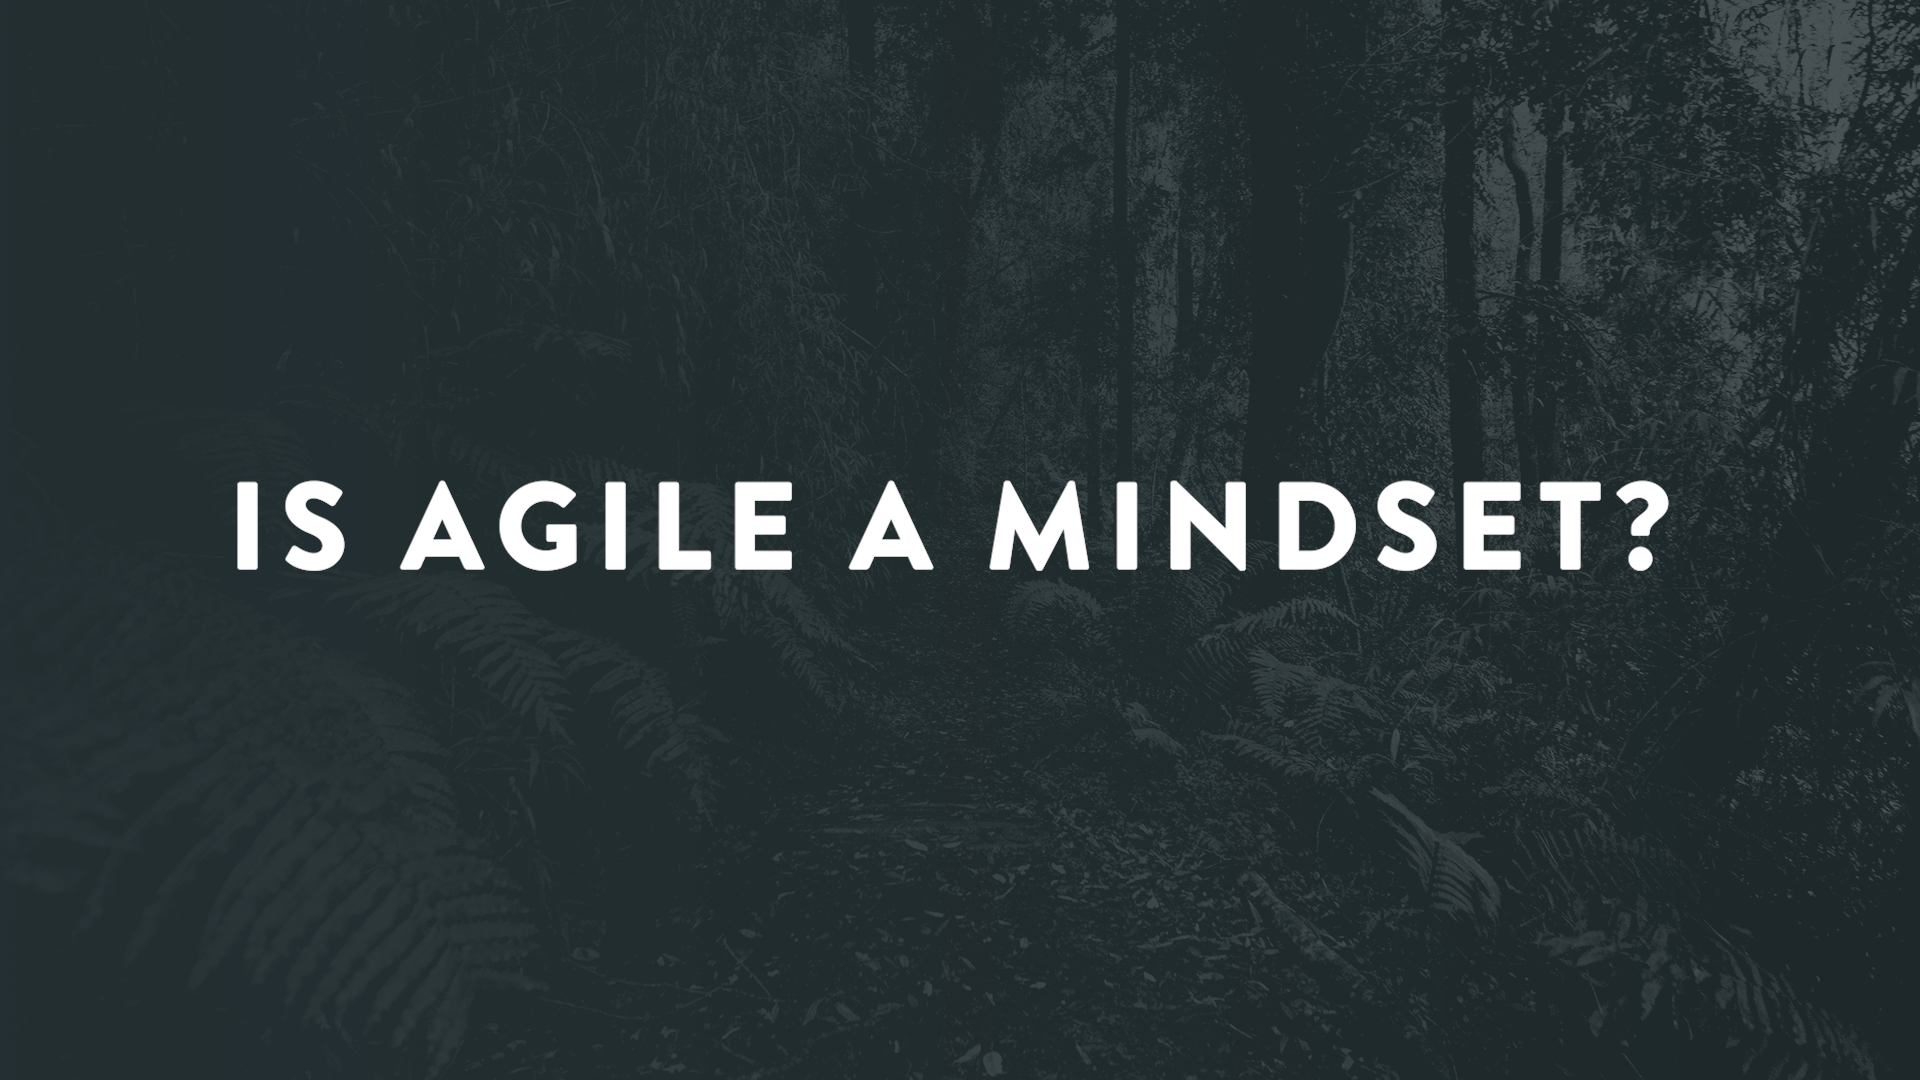 Agile is More Than a Mindset